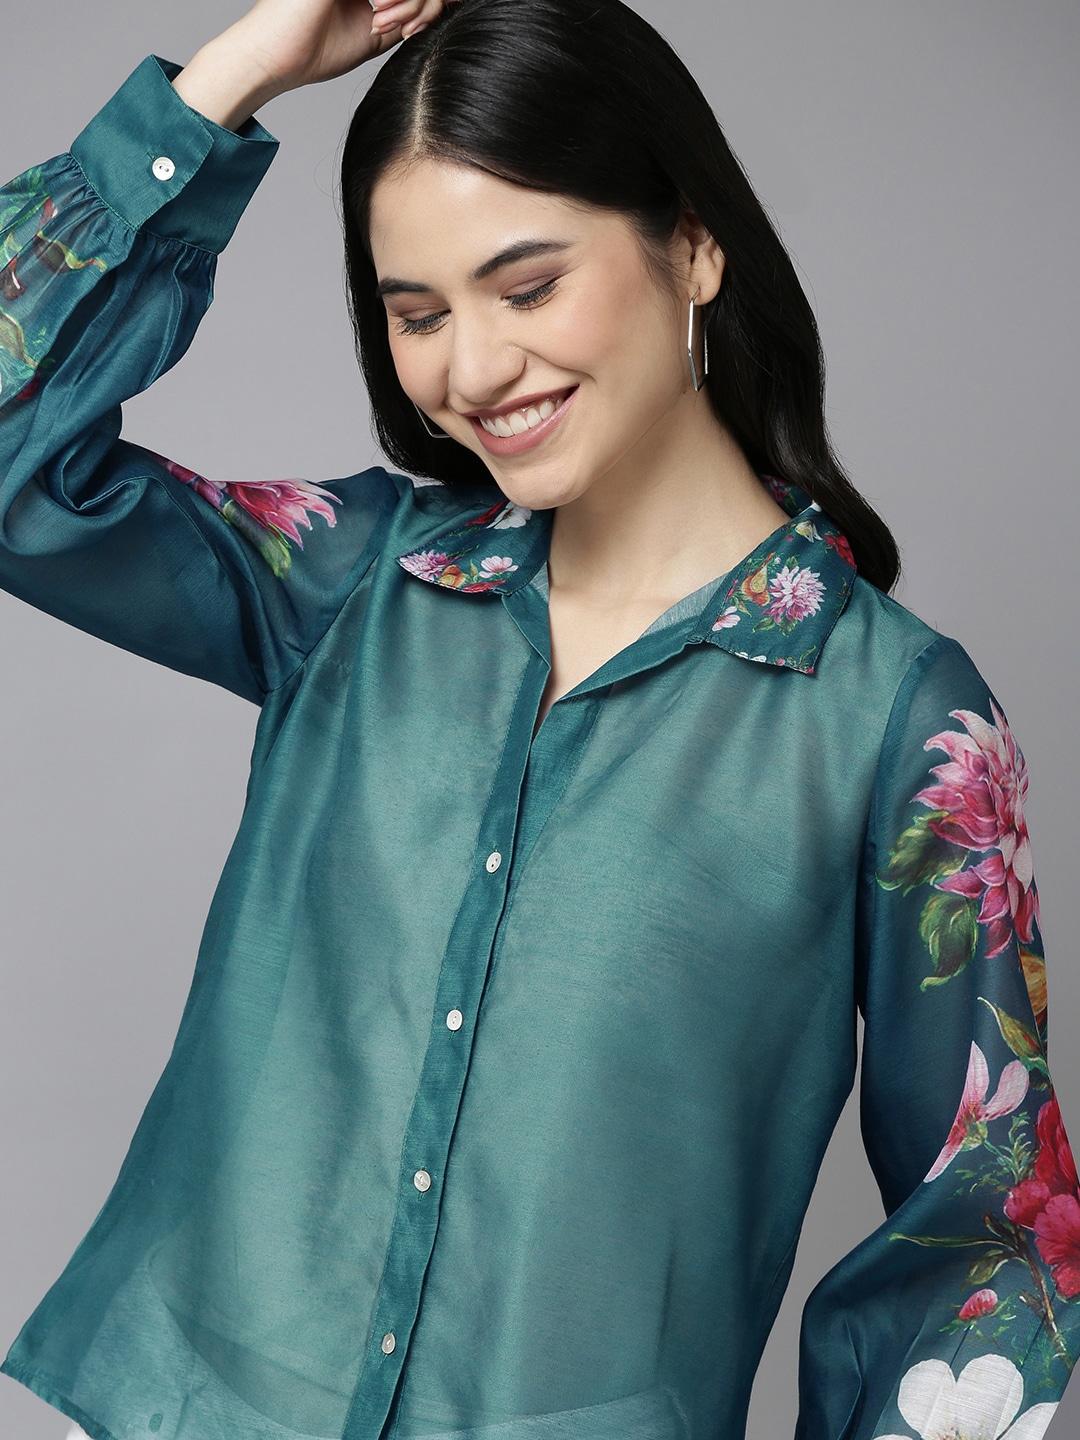 bhama-couture-women-teal-blue-floral-detail-shirt-style-top